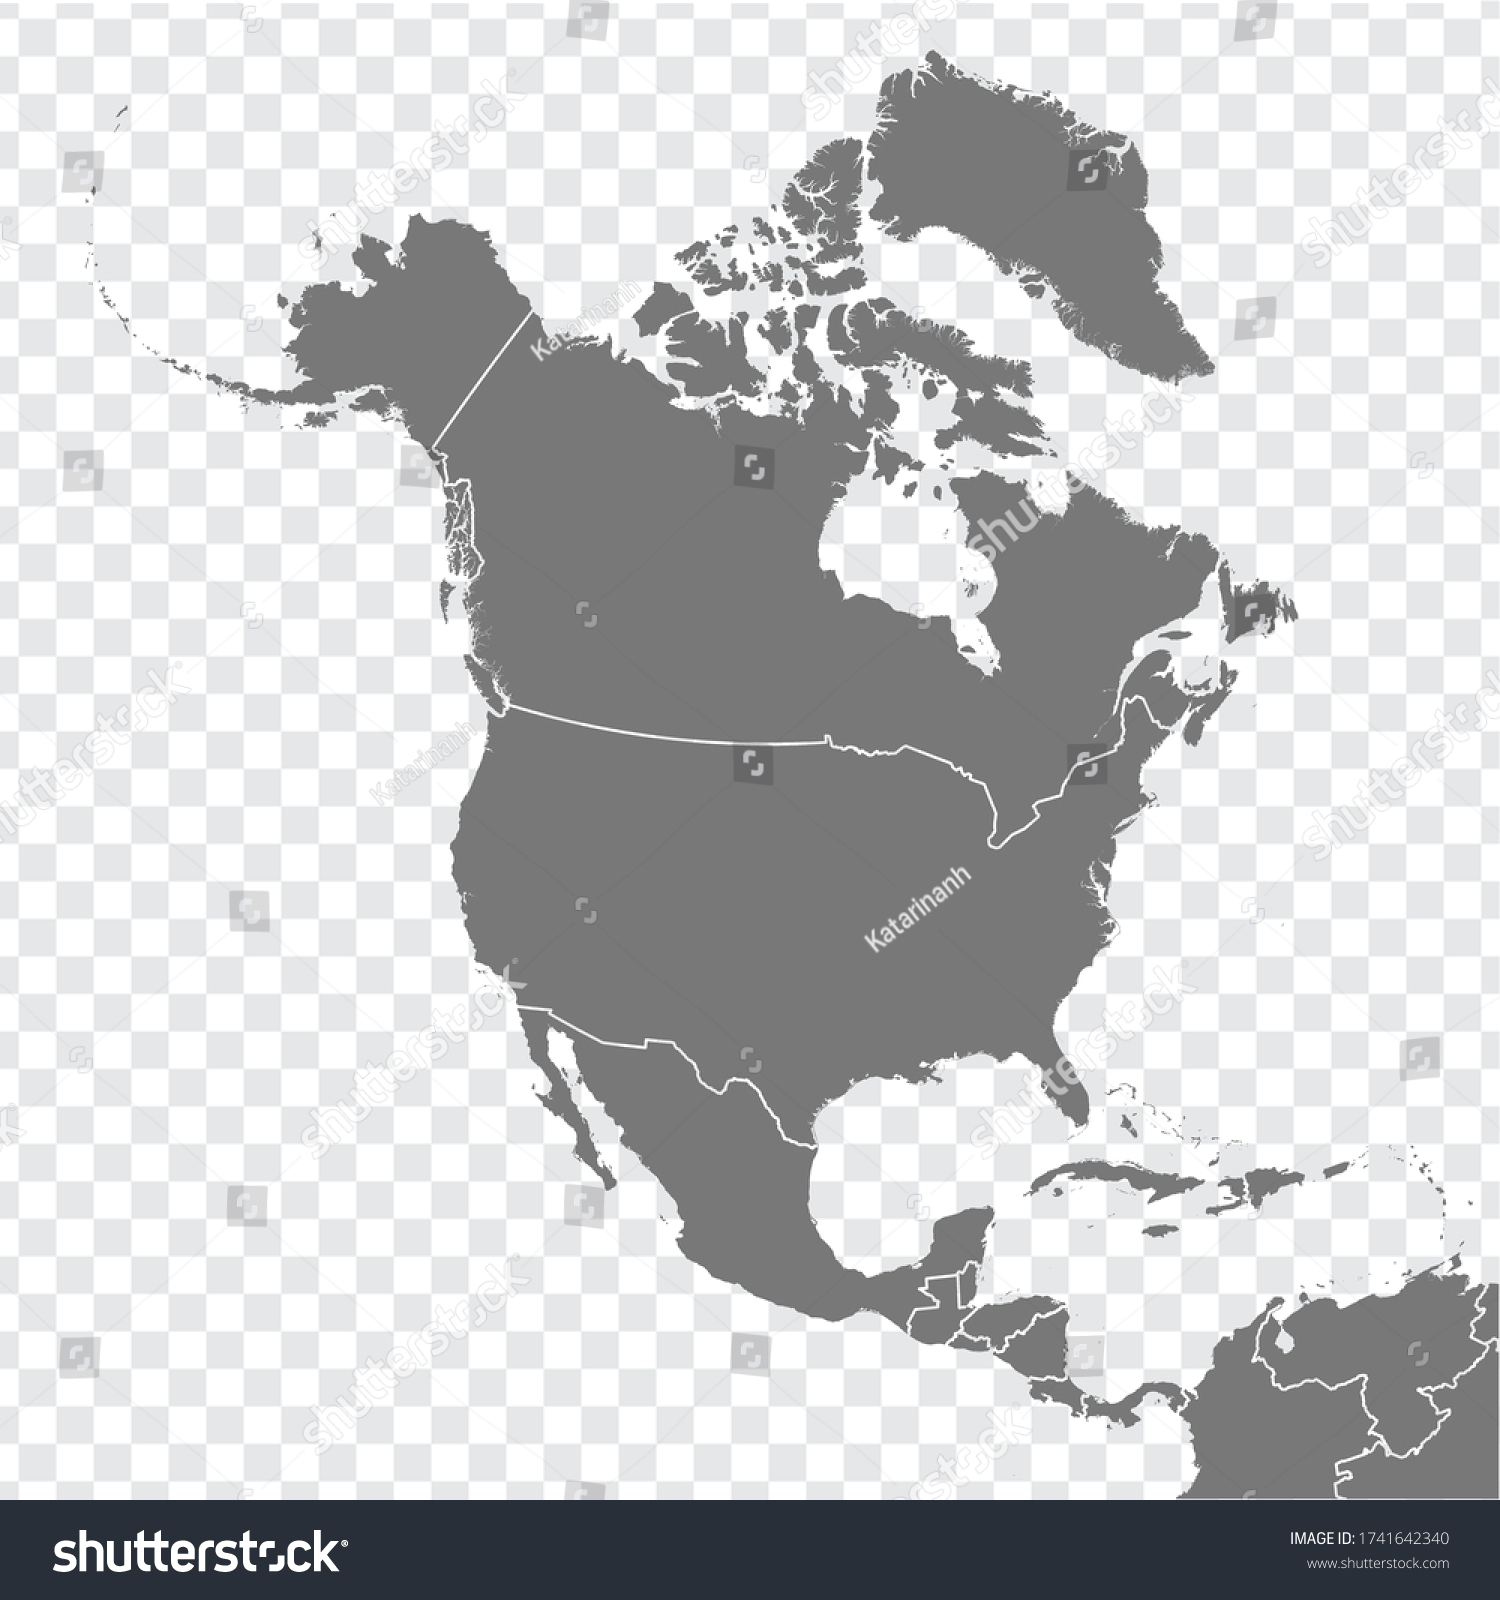 Stock Vector Map Of North America Blank Gray Map Of North America With Borders Of All Countries Map Of 1741642340 